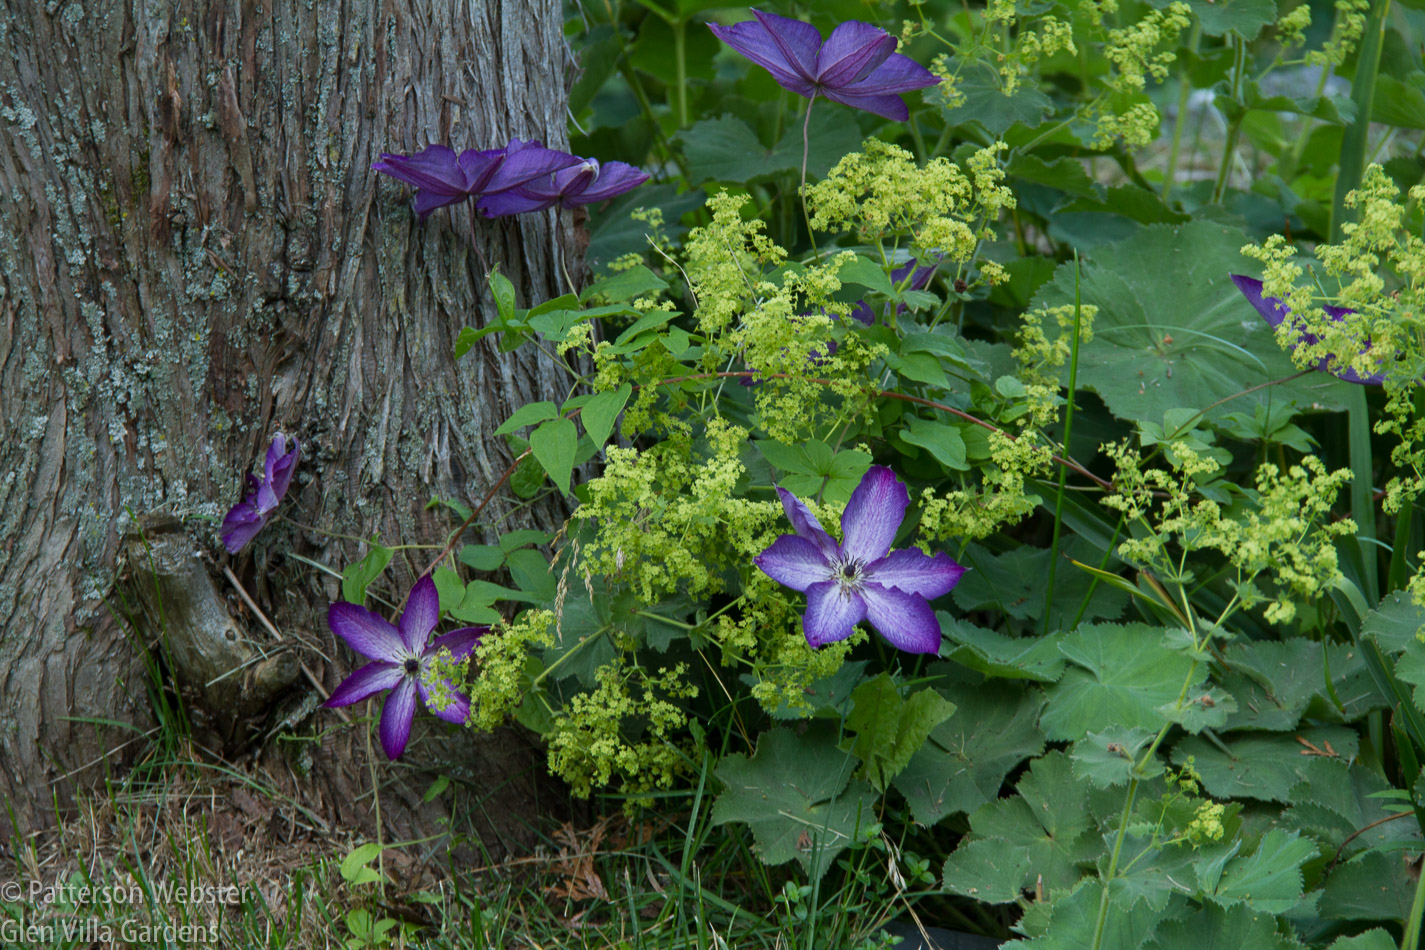 Clematis Violacea Venosa matches well with Achemilla mollis, or Lady's Mantle.